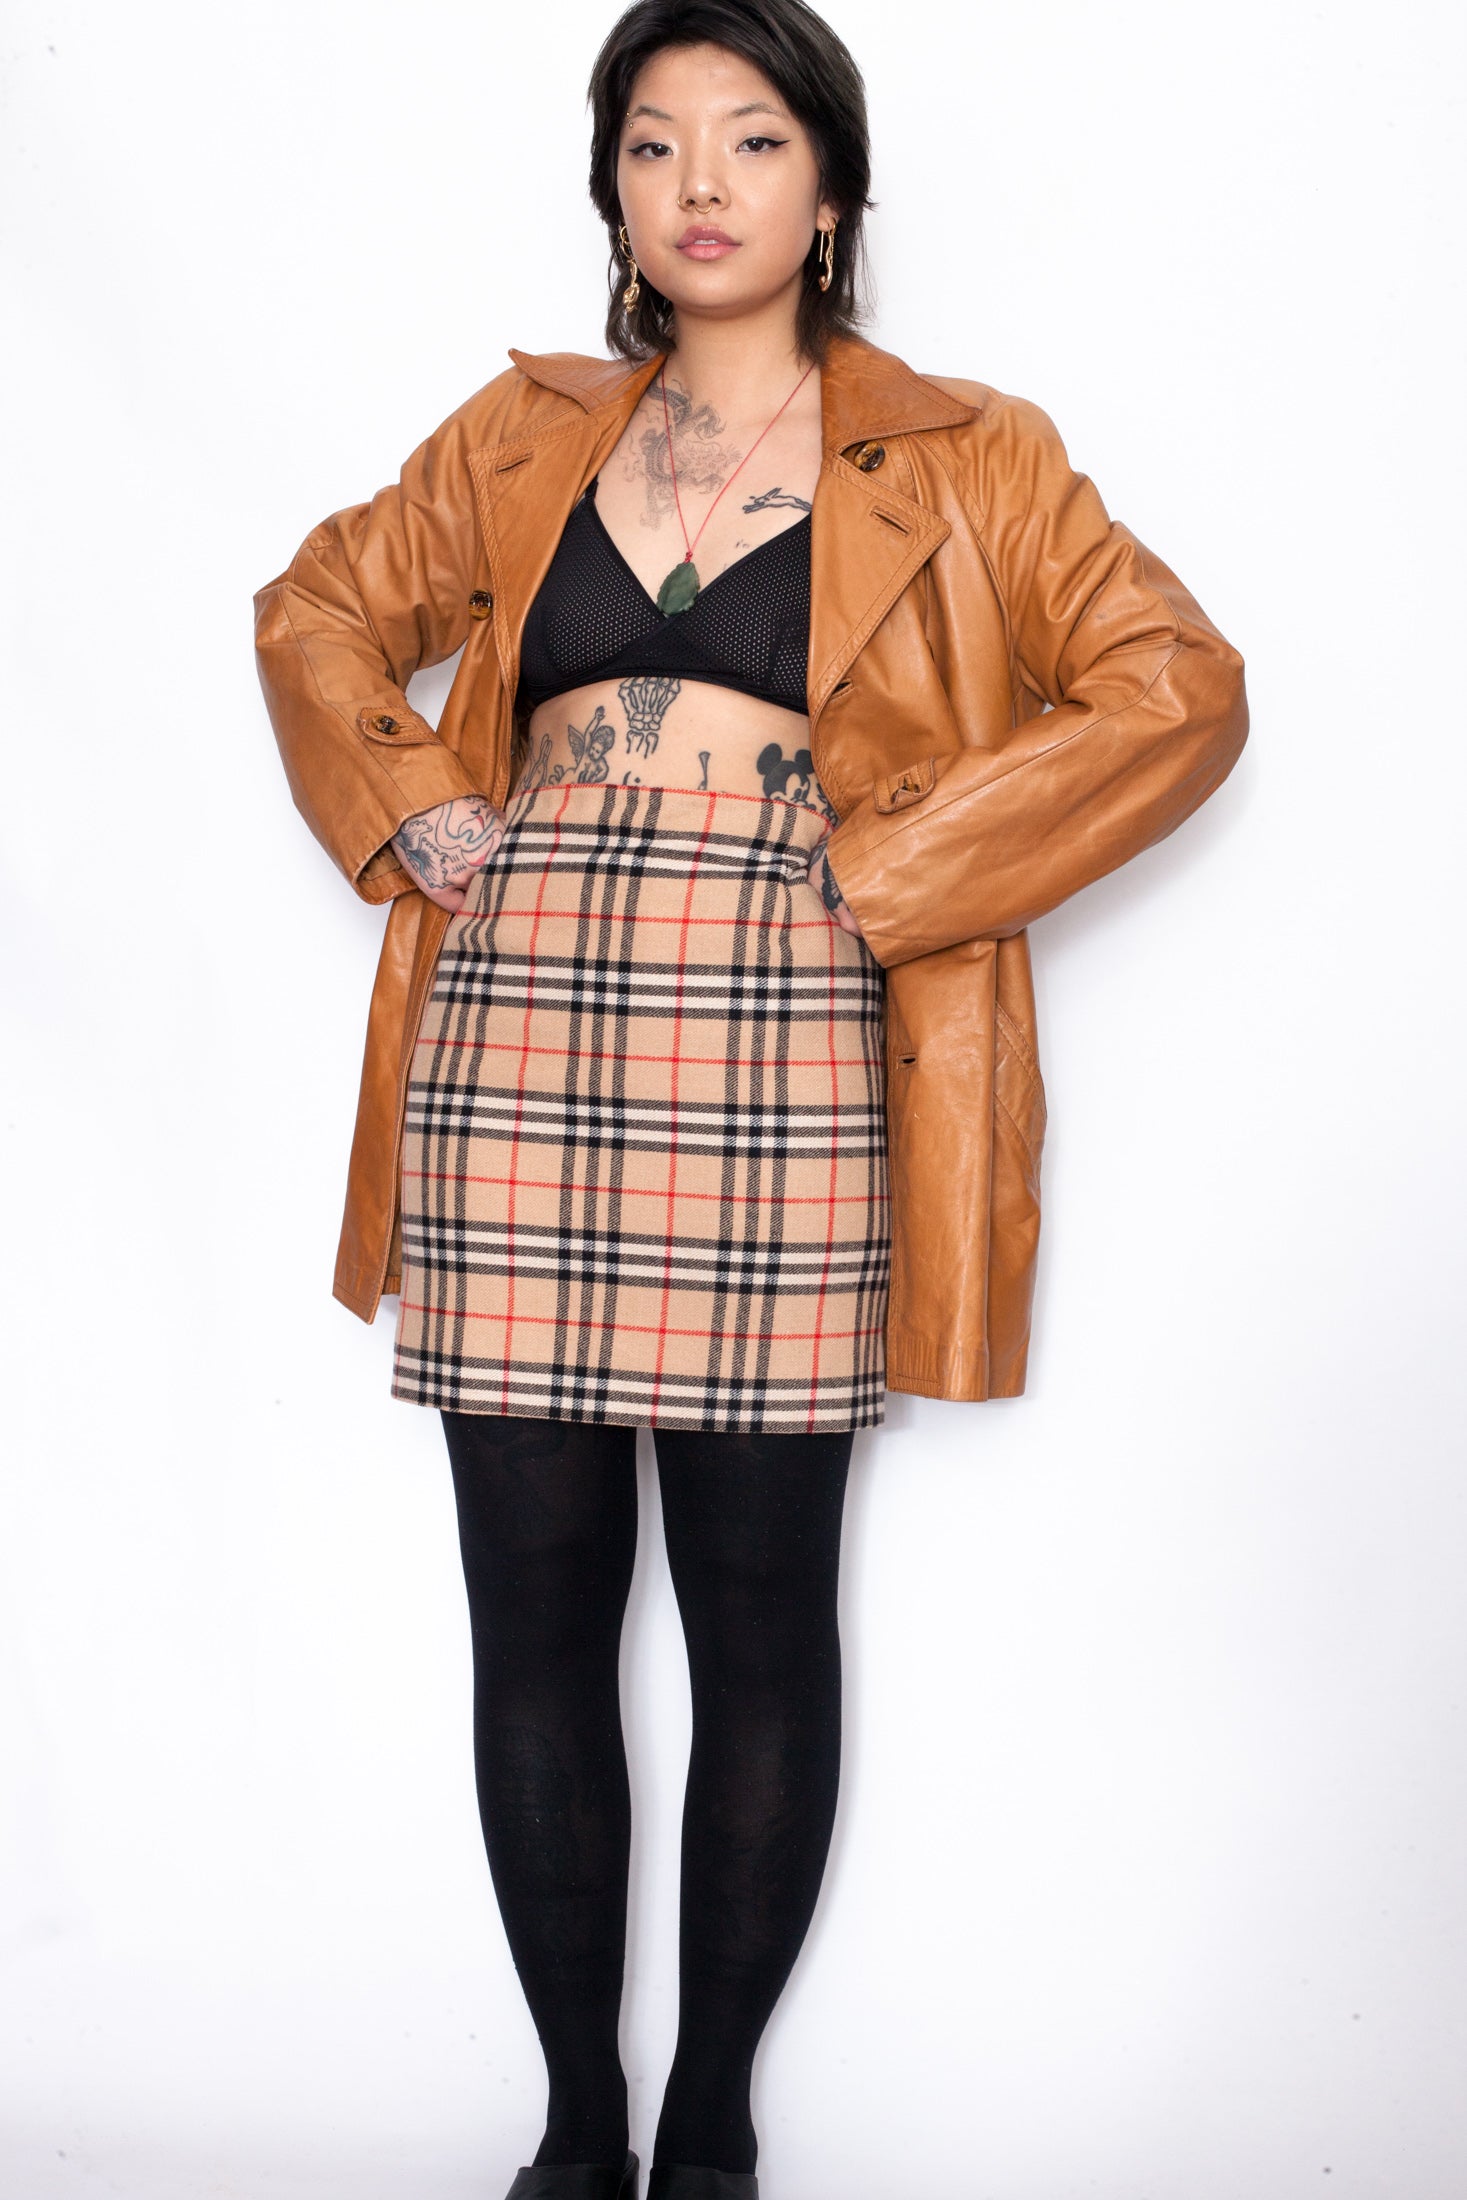 Vintage 90s Burberry-Like Pencil Skirt – Not Too Sweet